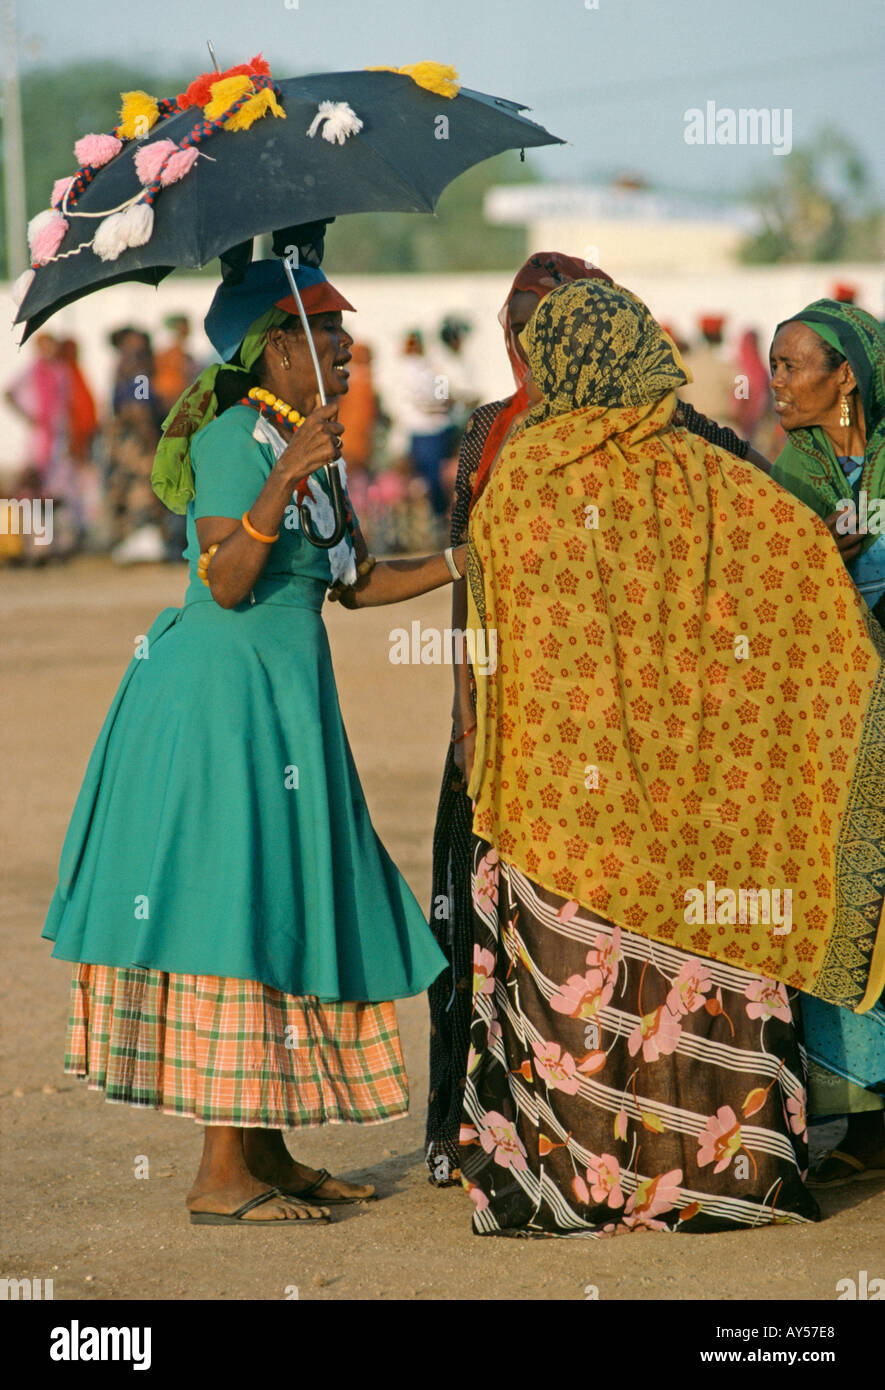 A decorated umbrella is a parasol as Muslim women chat in Djibouti Stock  Photo - Alamy